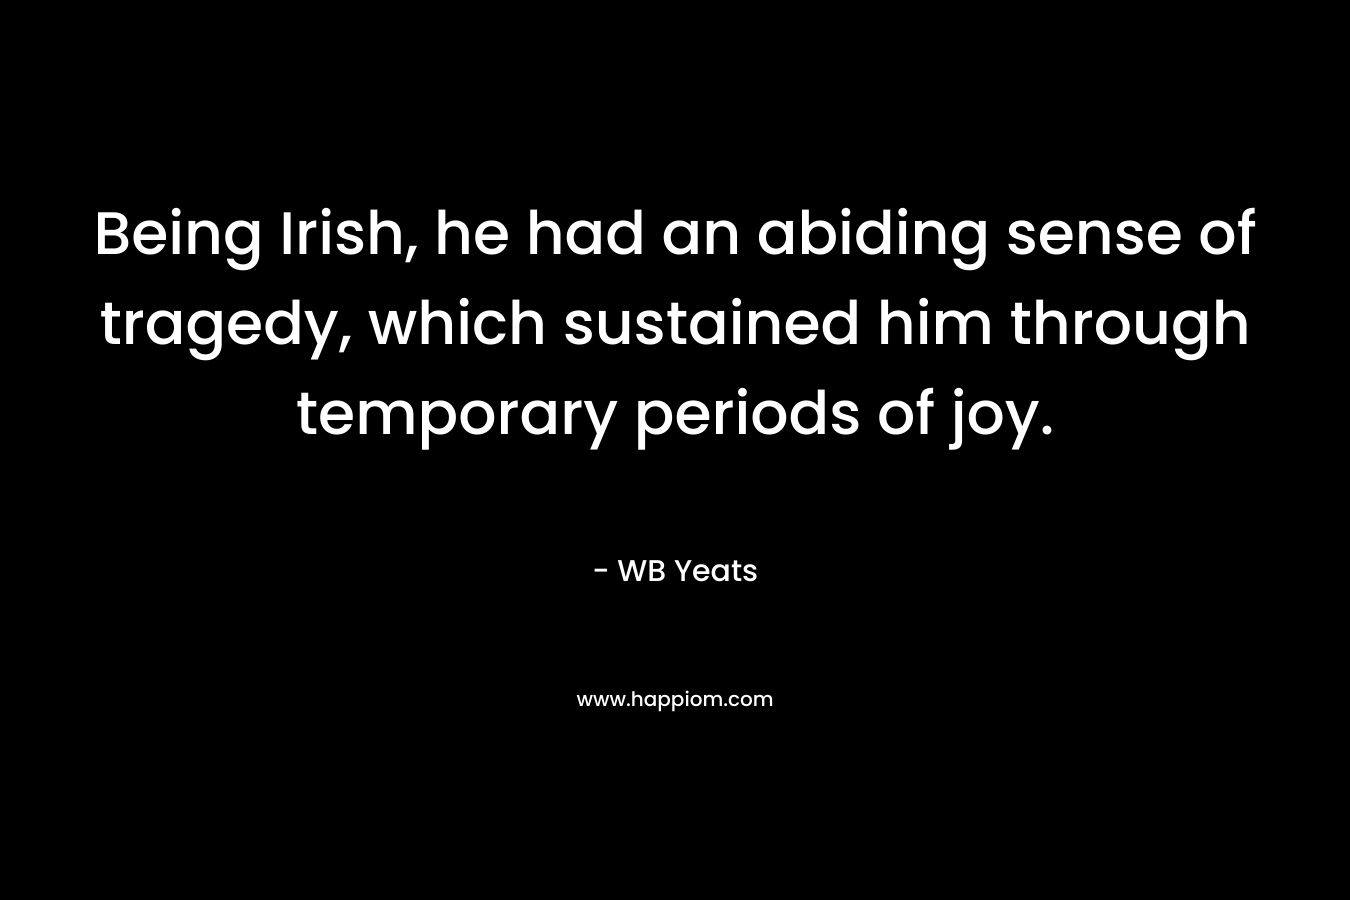 Being Irish, he had an abiding sense of tragedy, which sustained him through temporary periods of joy. – WB Yeats